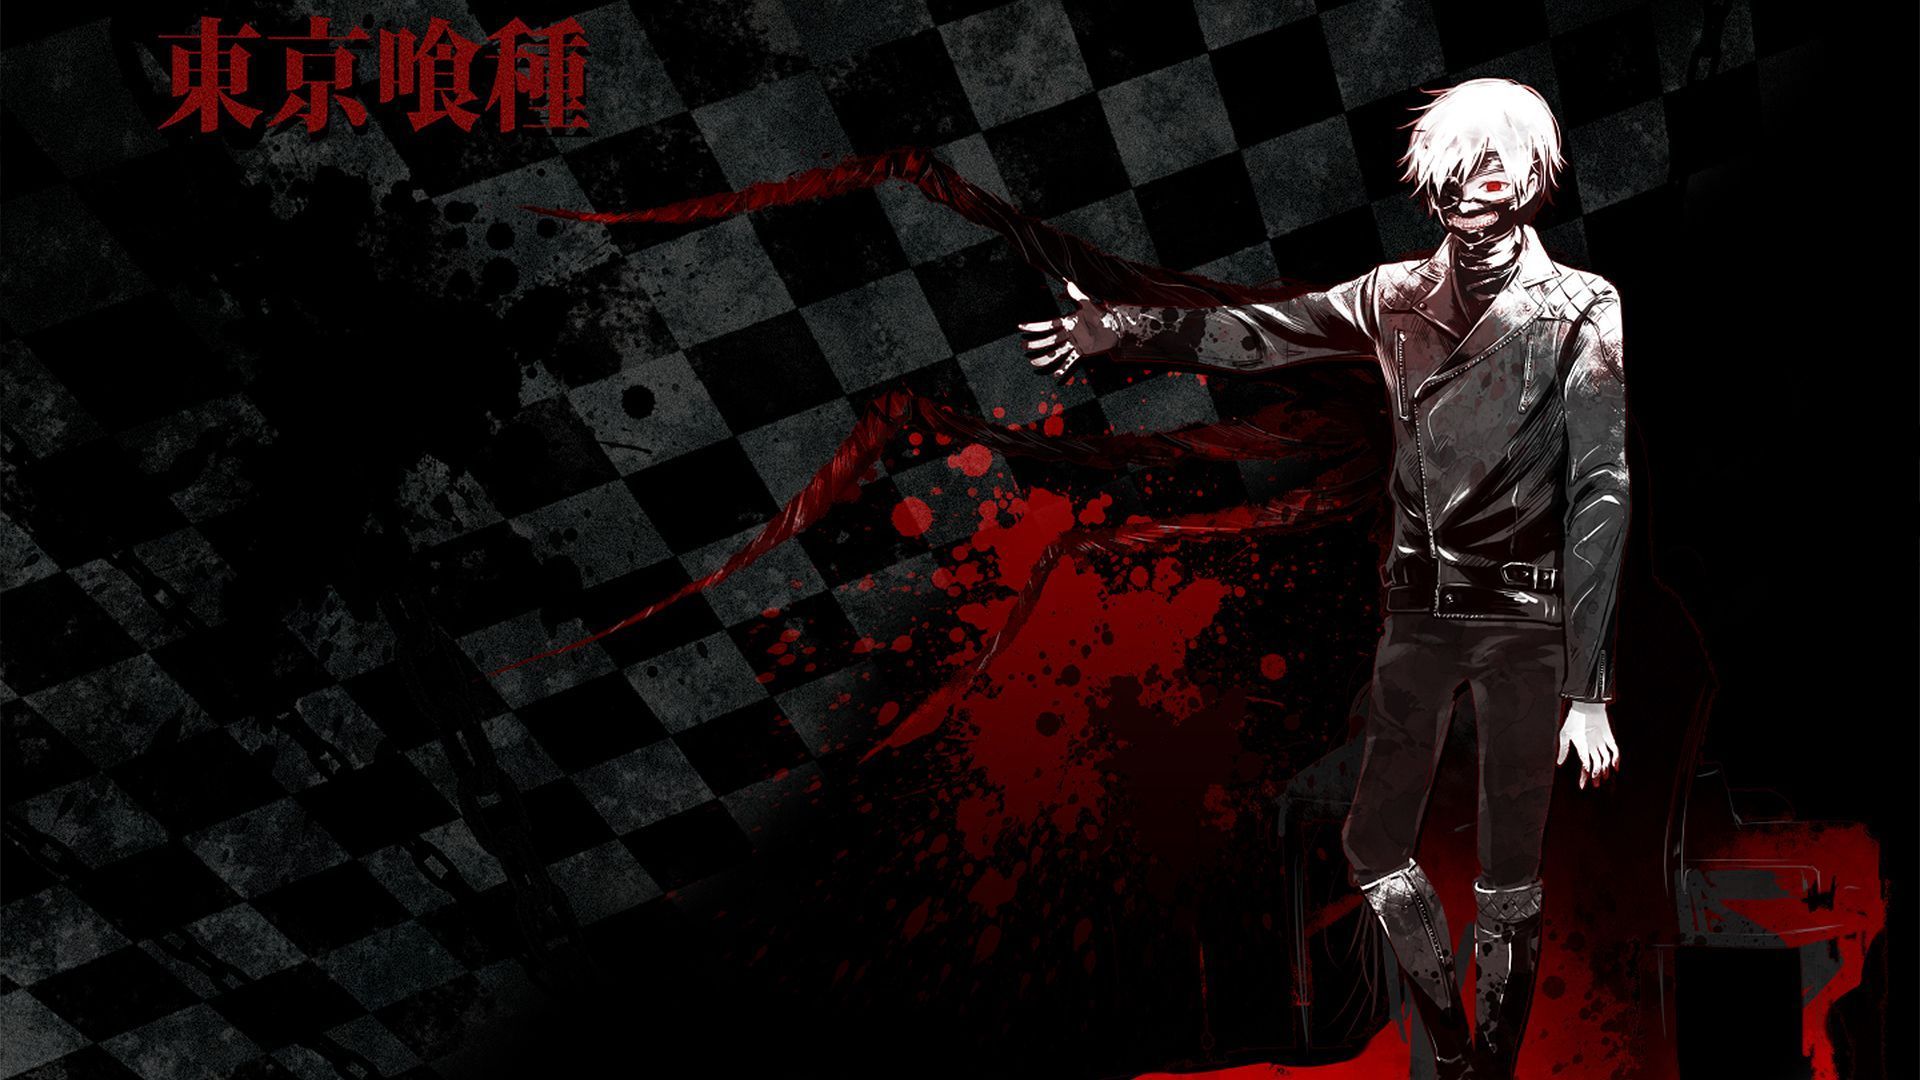 Tokyo Ghoul | HD Wallpapers | Page 6